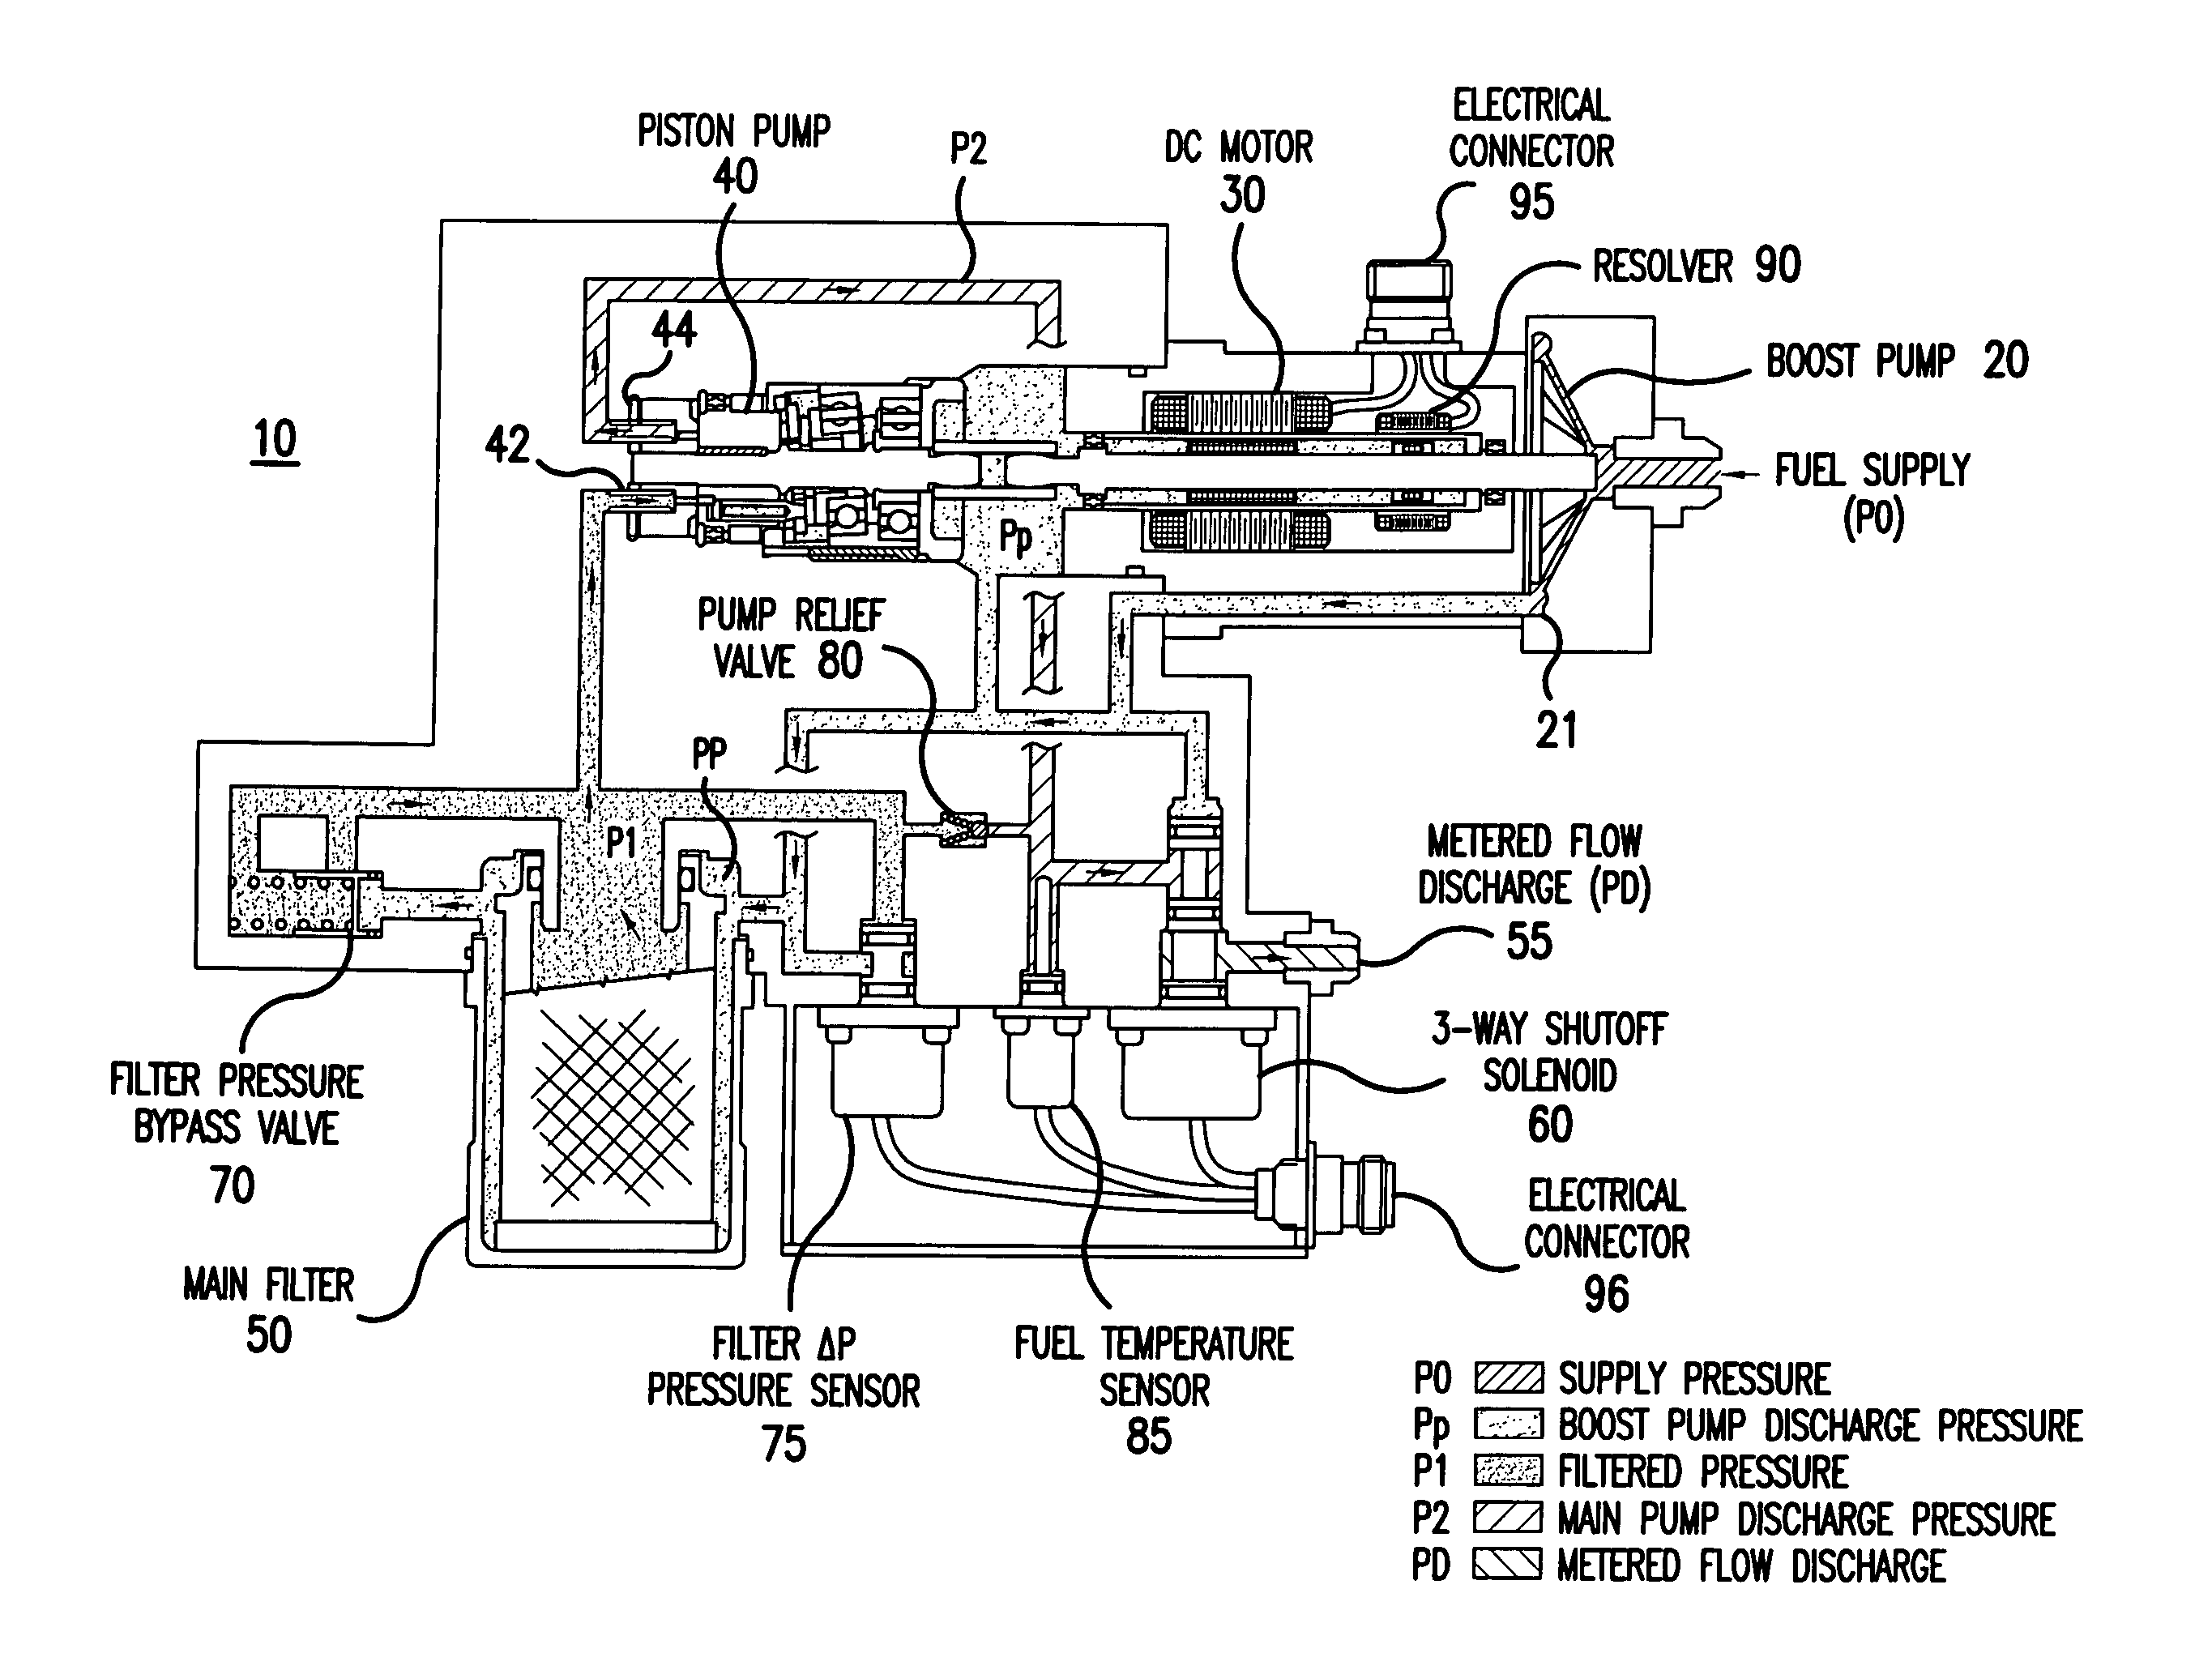 High accuracy fuel metering system for turbine engines